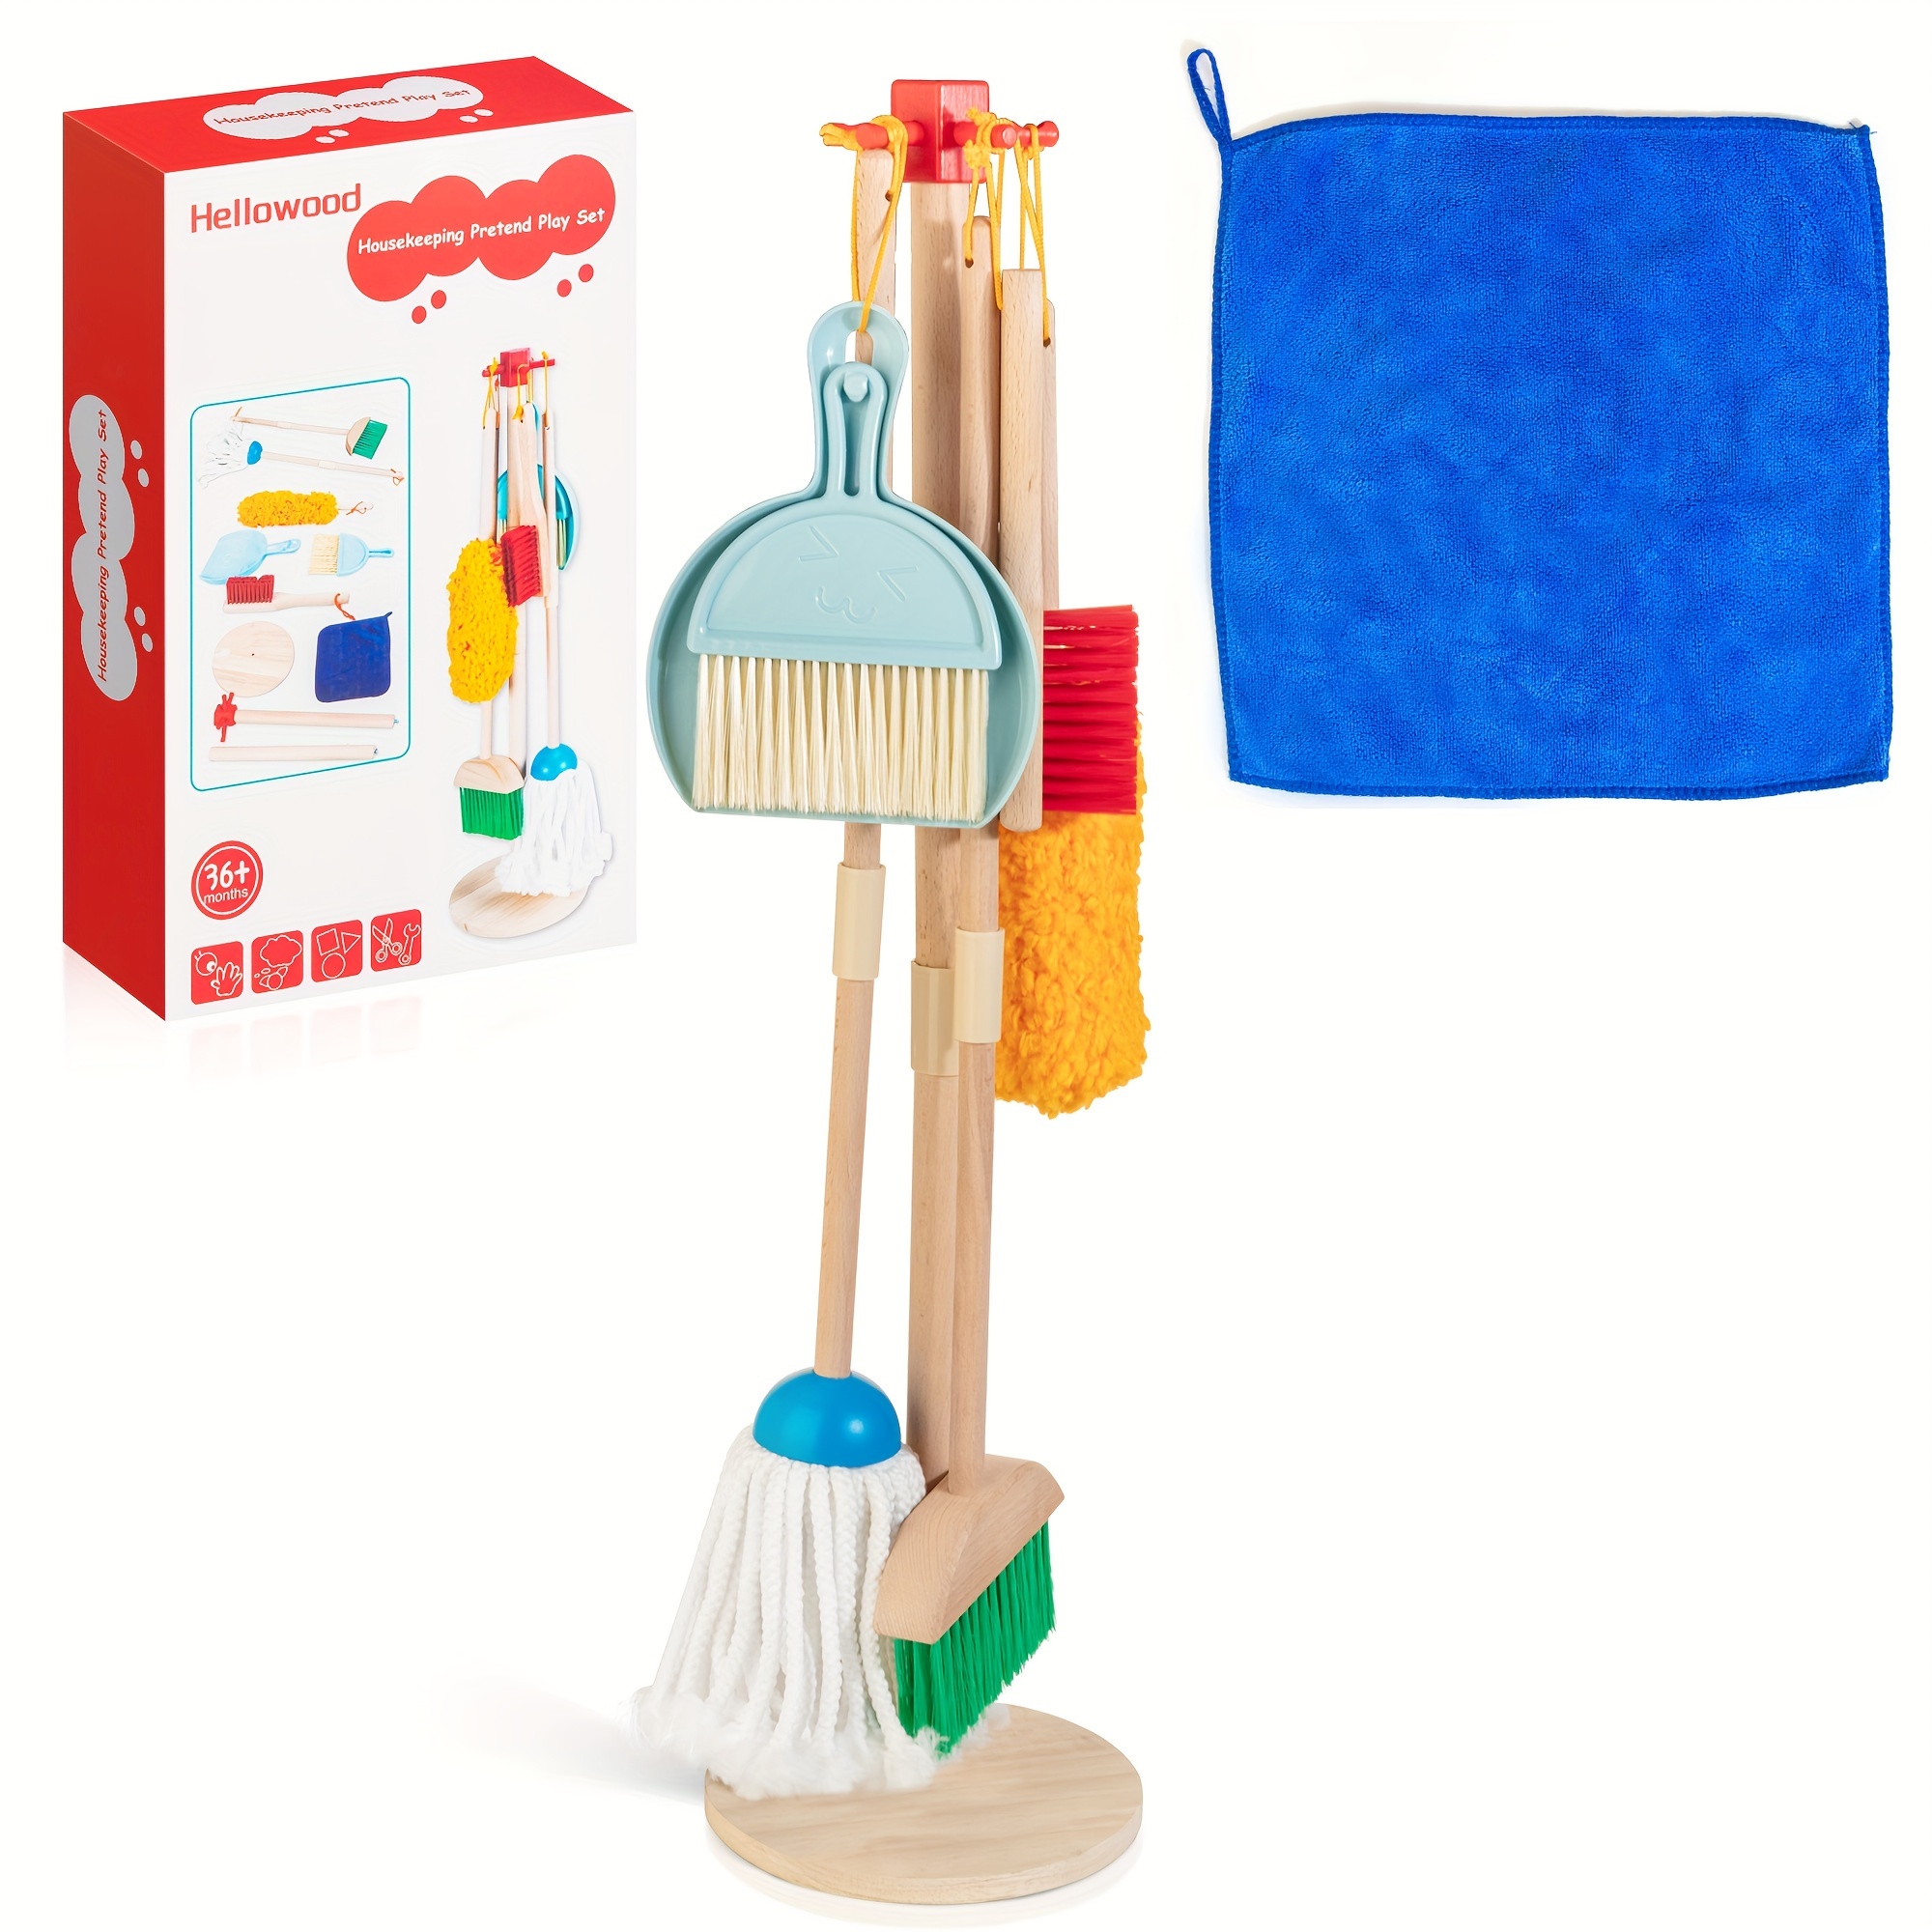 

8 Pieces Wooden Housekeeping Pretend Play Set For Kids, Extended Mop&broom, Detachable Toddler Toy Cleaning Set, Housework Role Play Set Gift For Boys Girls Age 3 4 5 6 7, Fine Motor Skill